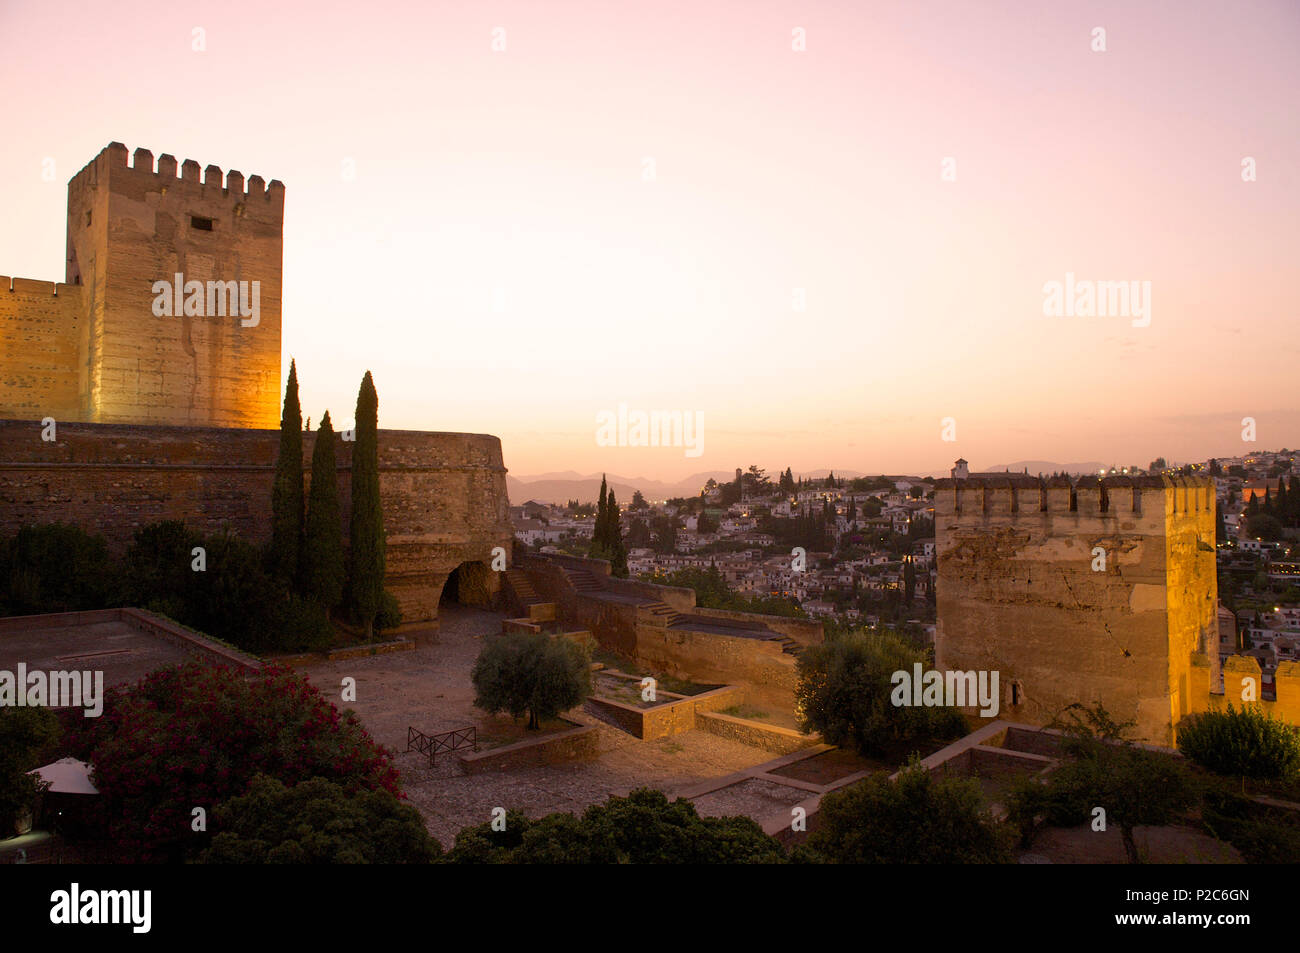 Towers of the Alhambra fortress and view over Granada in the evening, Granada, Andalusia, Spain Stock Photo